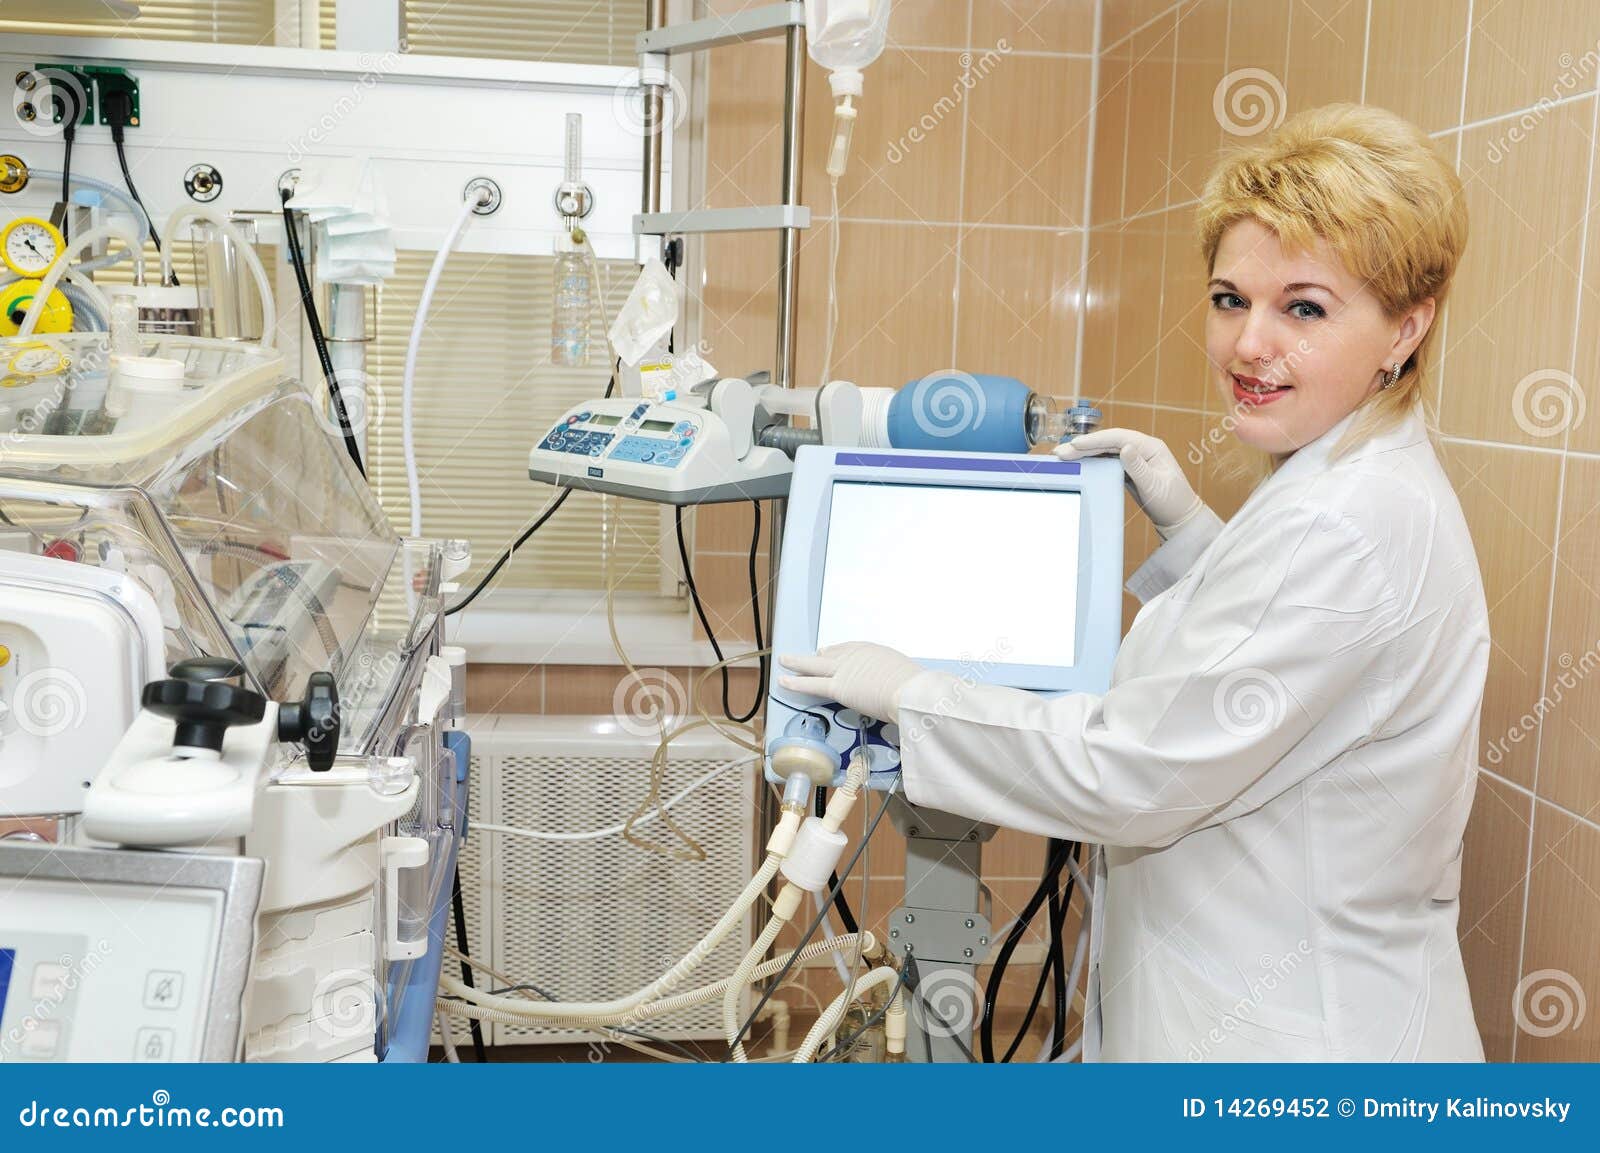 medic doctor with equipment for